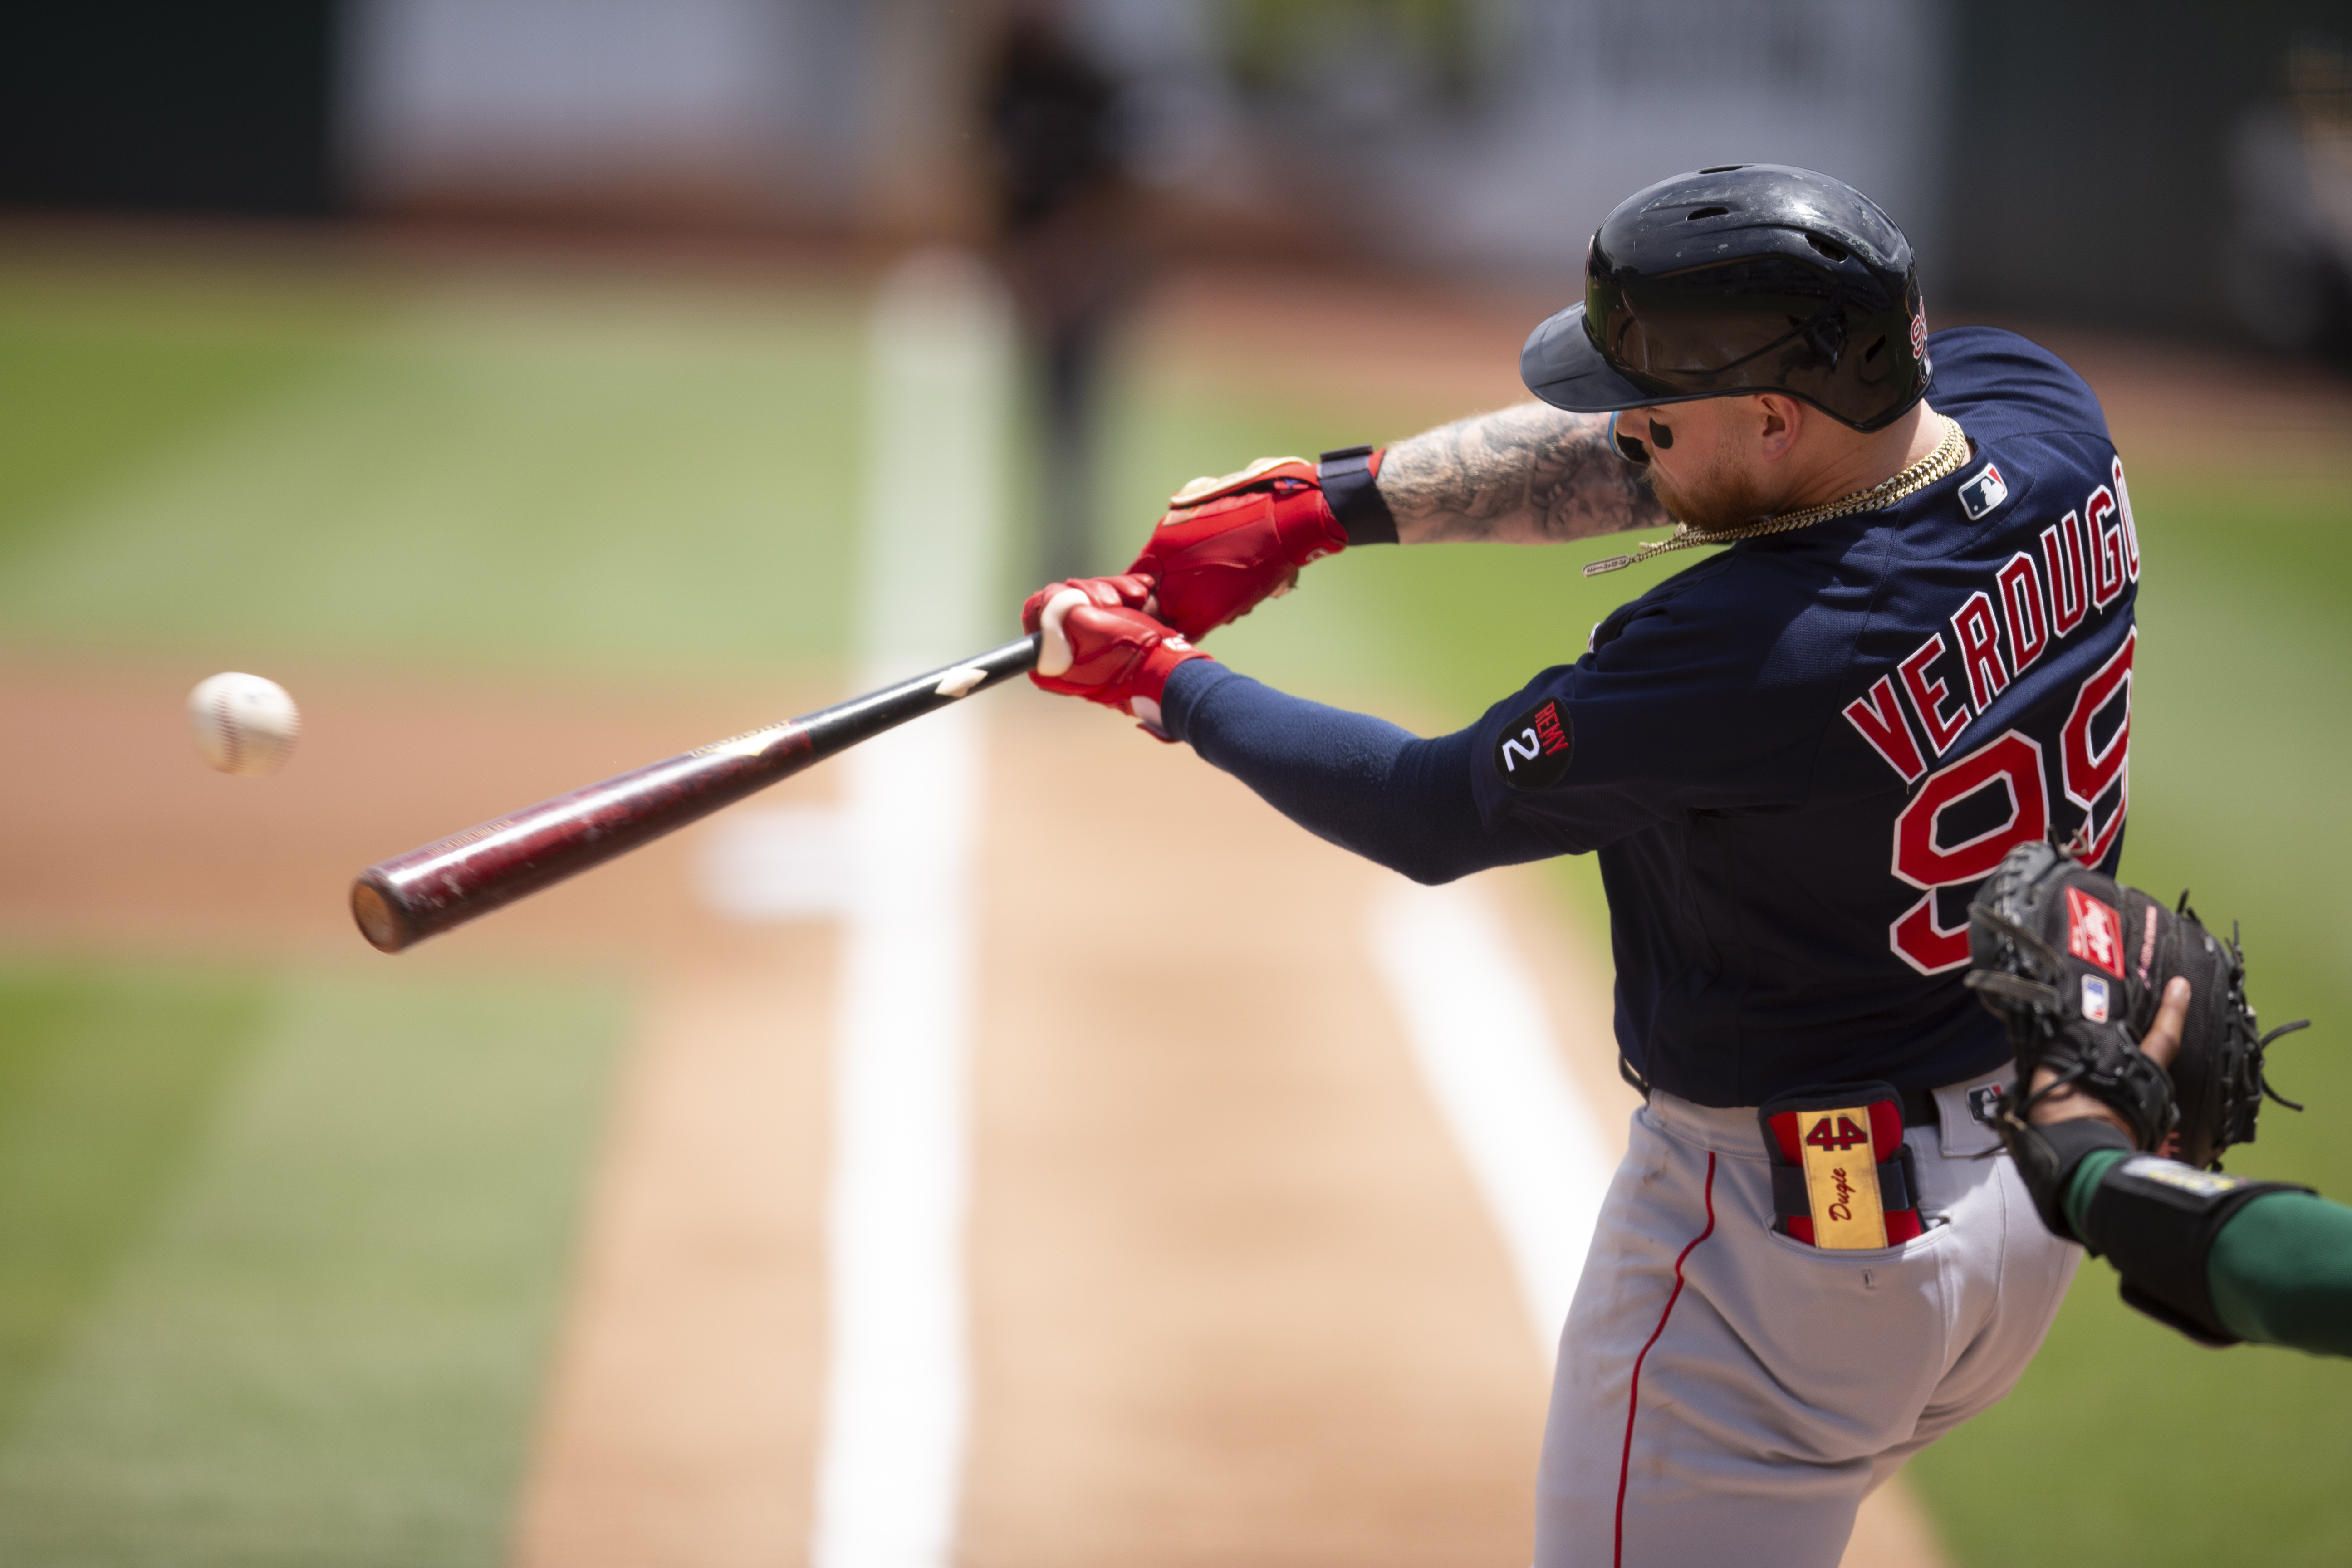 Red Sox outfielder Alex Verdugo shares desire to pitch, too